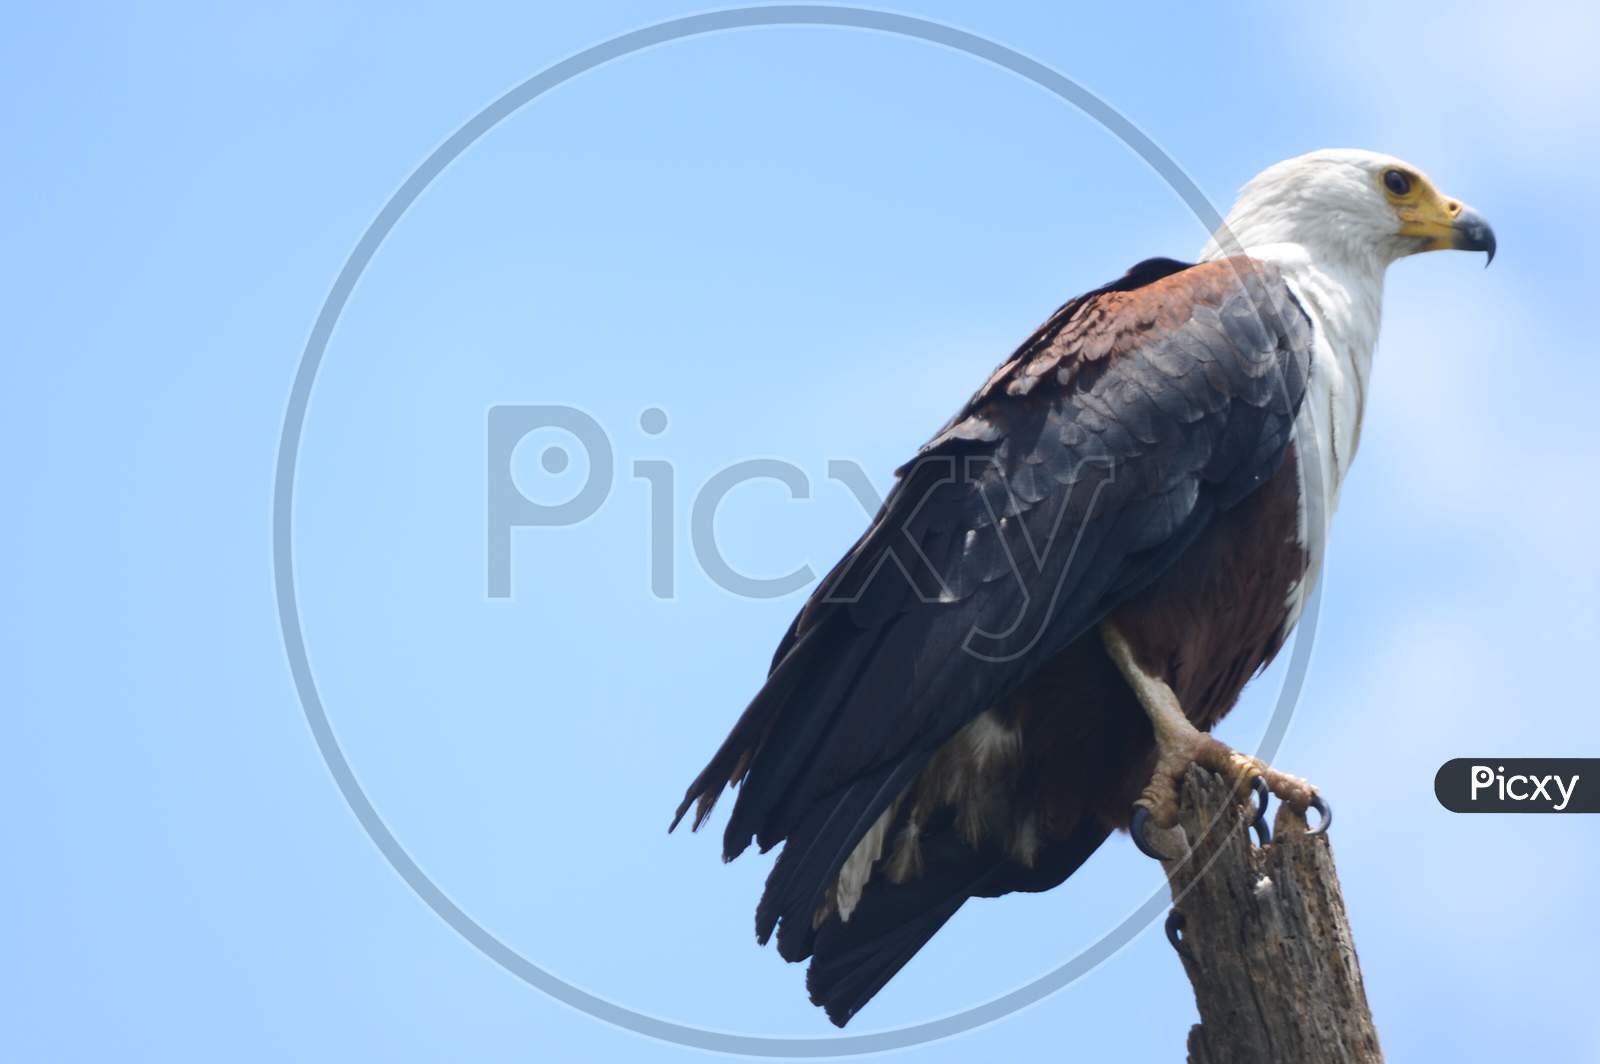 Fish Eagle Captured with blue sky background